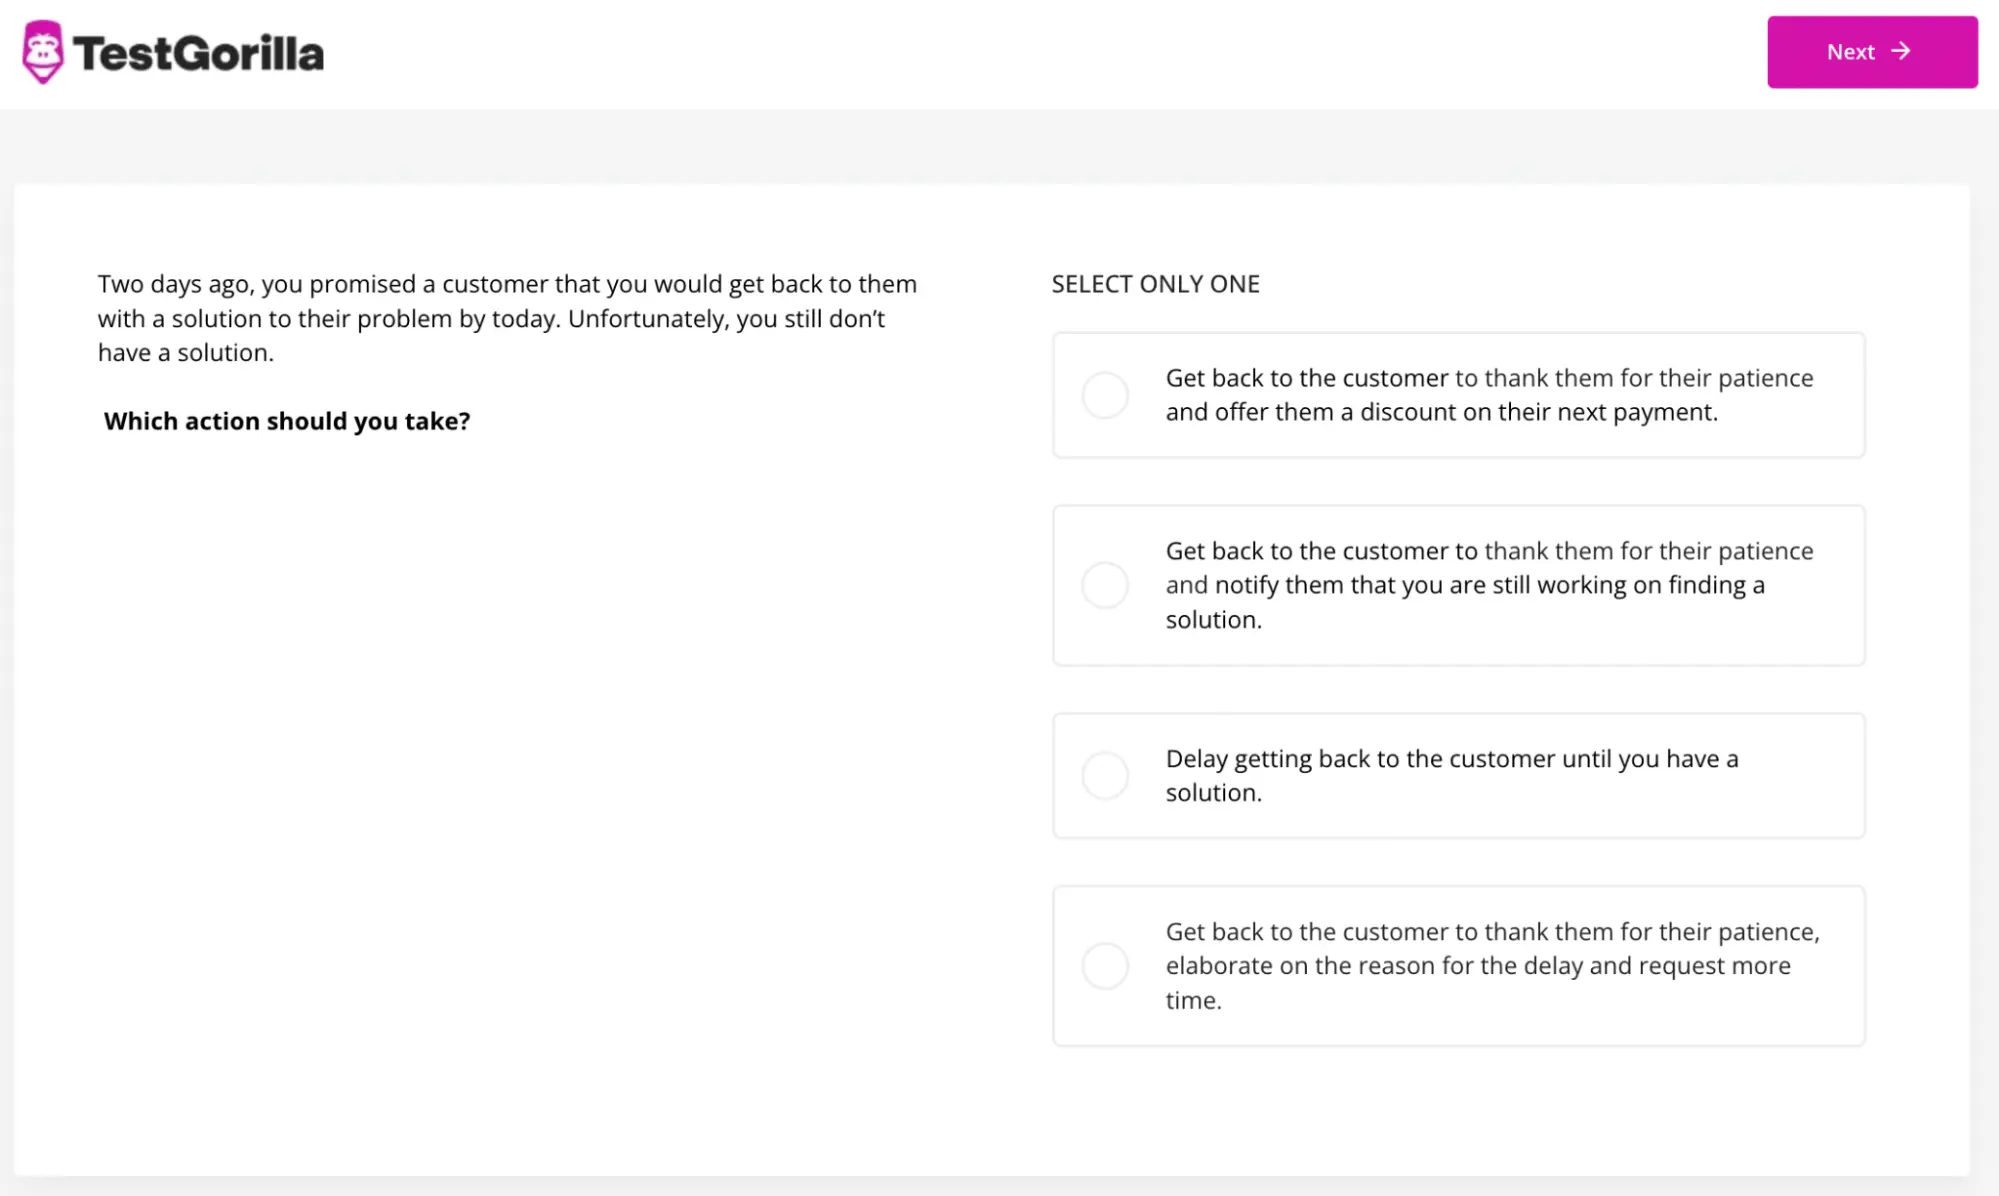 An example question from TestGorilla's Customer Service test